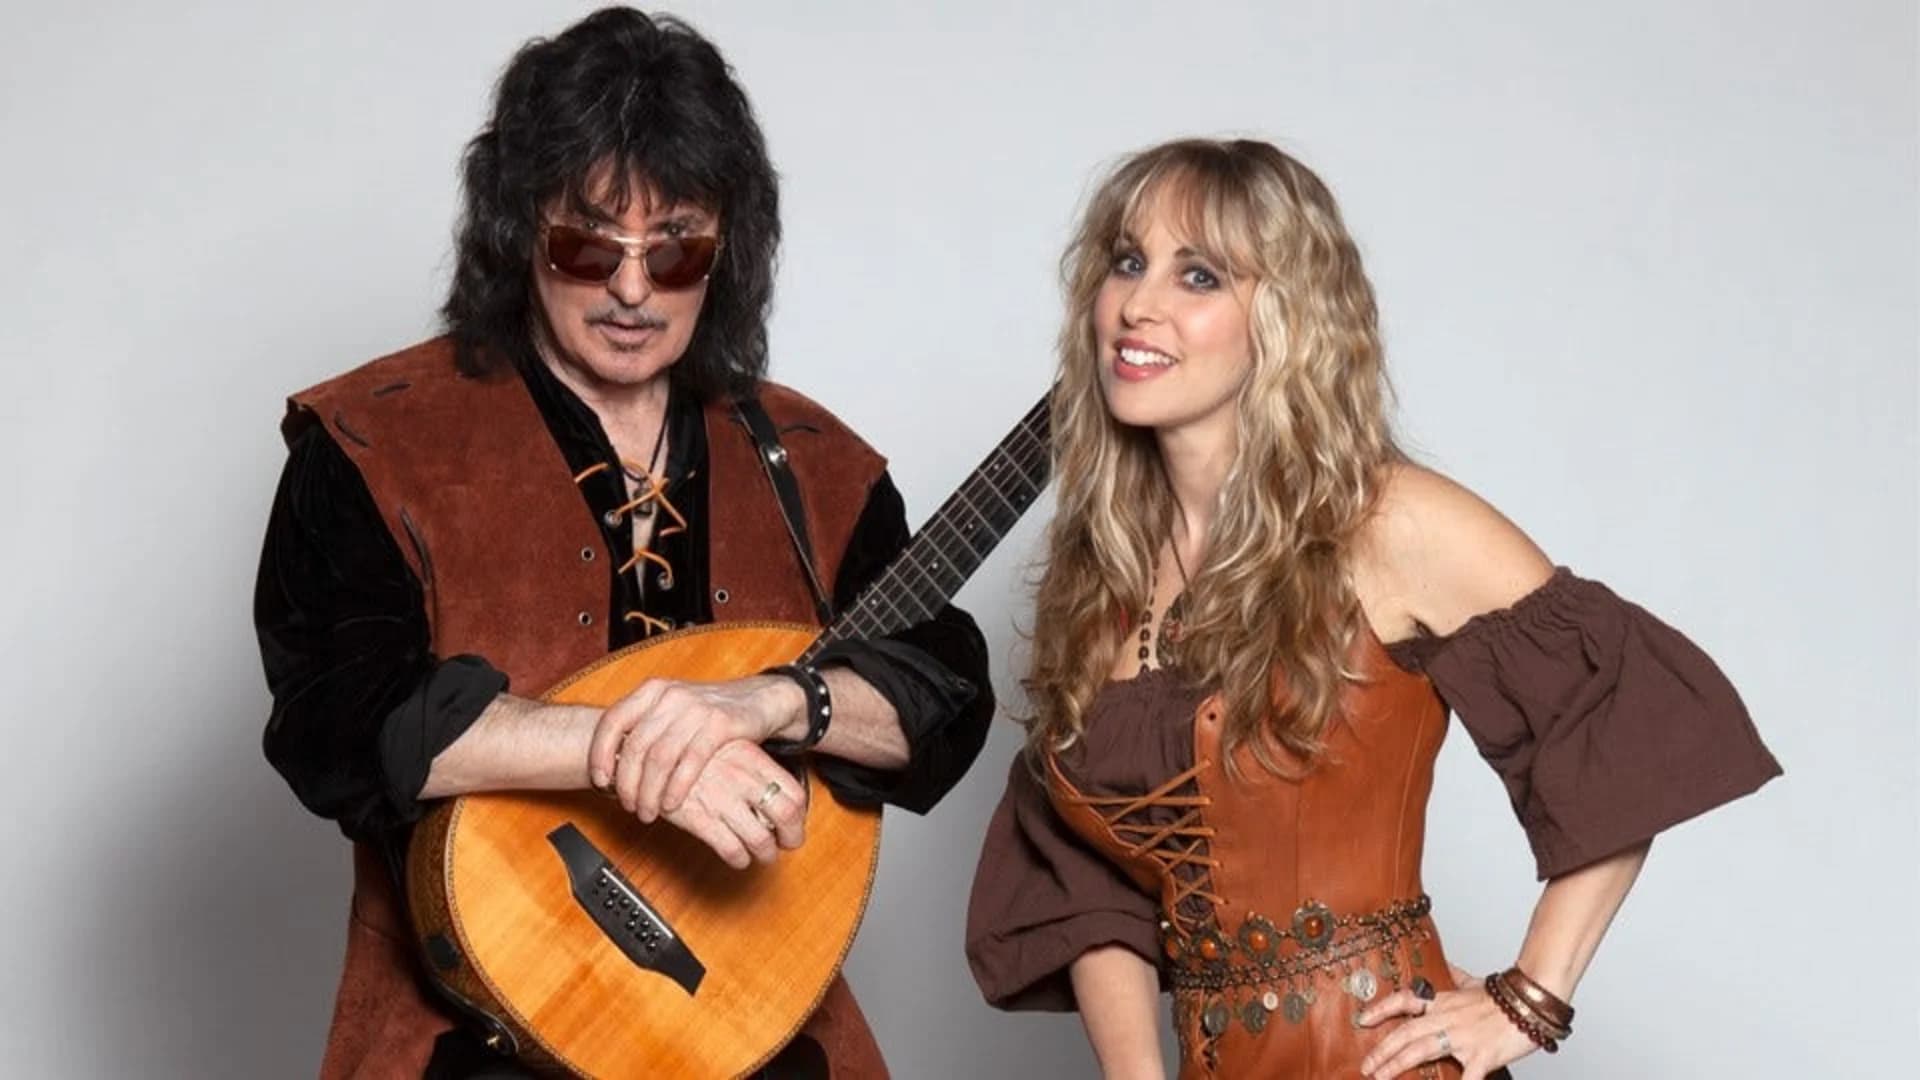 TONIGHT: Hall-of-Fame guitarist Ritchie Blackmore takes part in News 12 social media concert series